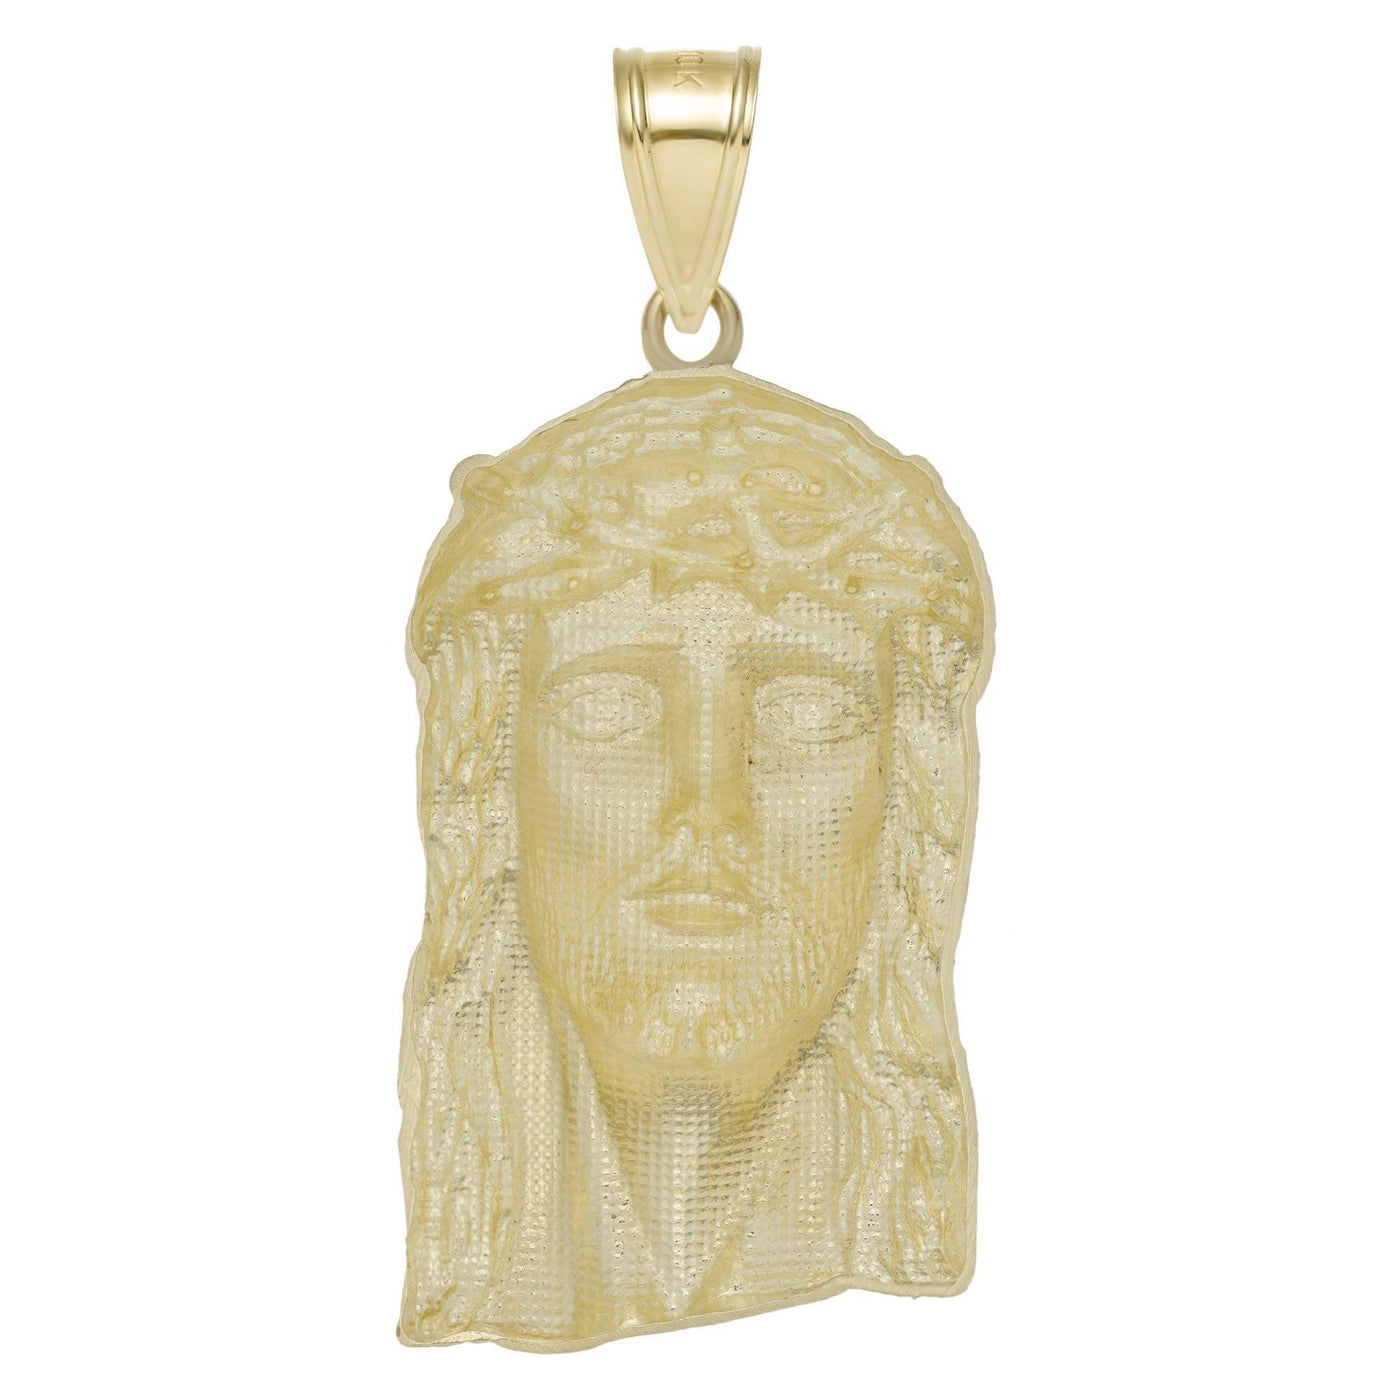 2 1/2" Textured Face Of Jesus Pendant Solid 10K Yellow Gold - bayamjewelry